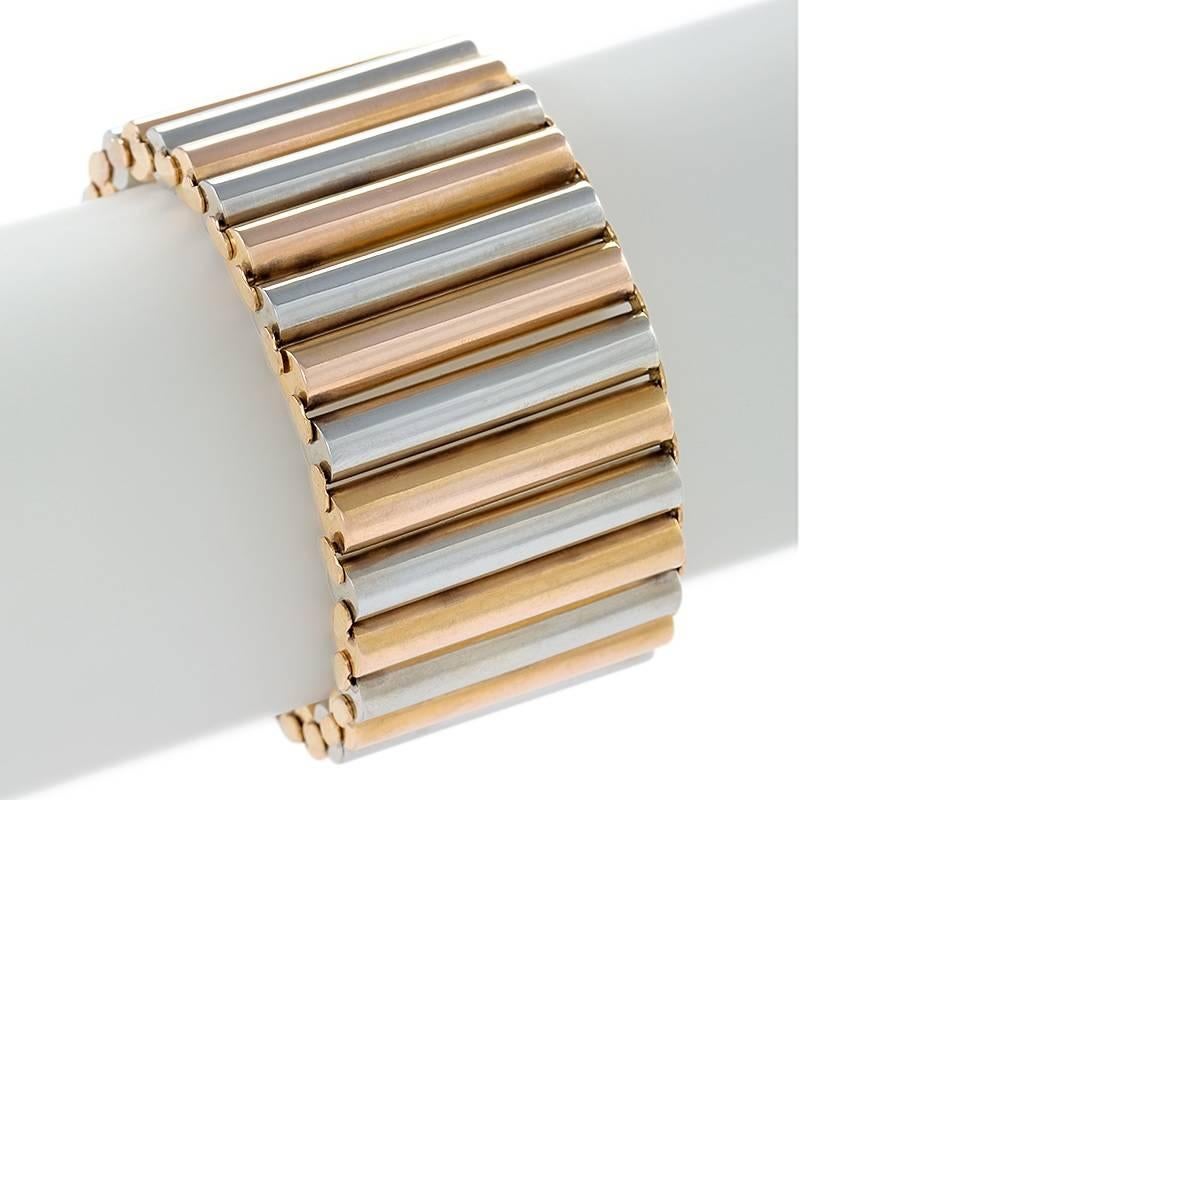 Dating from the 1940s, this flexible European bracelet is composed of alternating rose gold and white gold cylindrical links. Wide, light to wear, and beautifully articulated, this period bracelet is a statement of bold Retro style.

Circa: